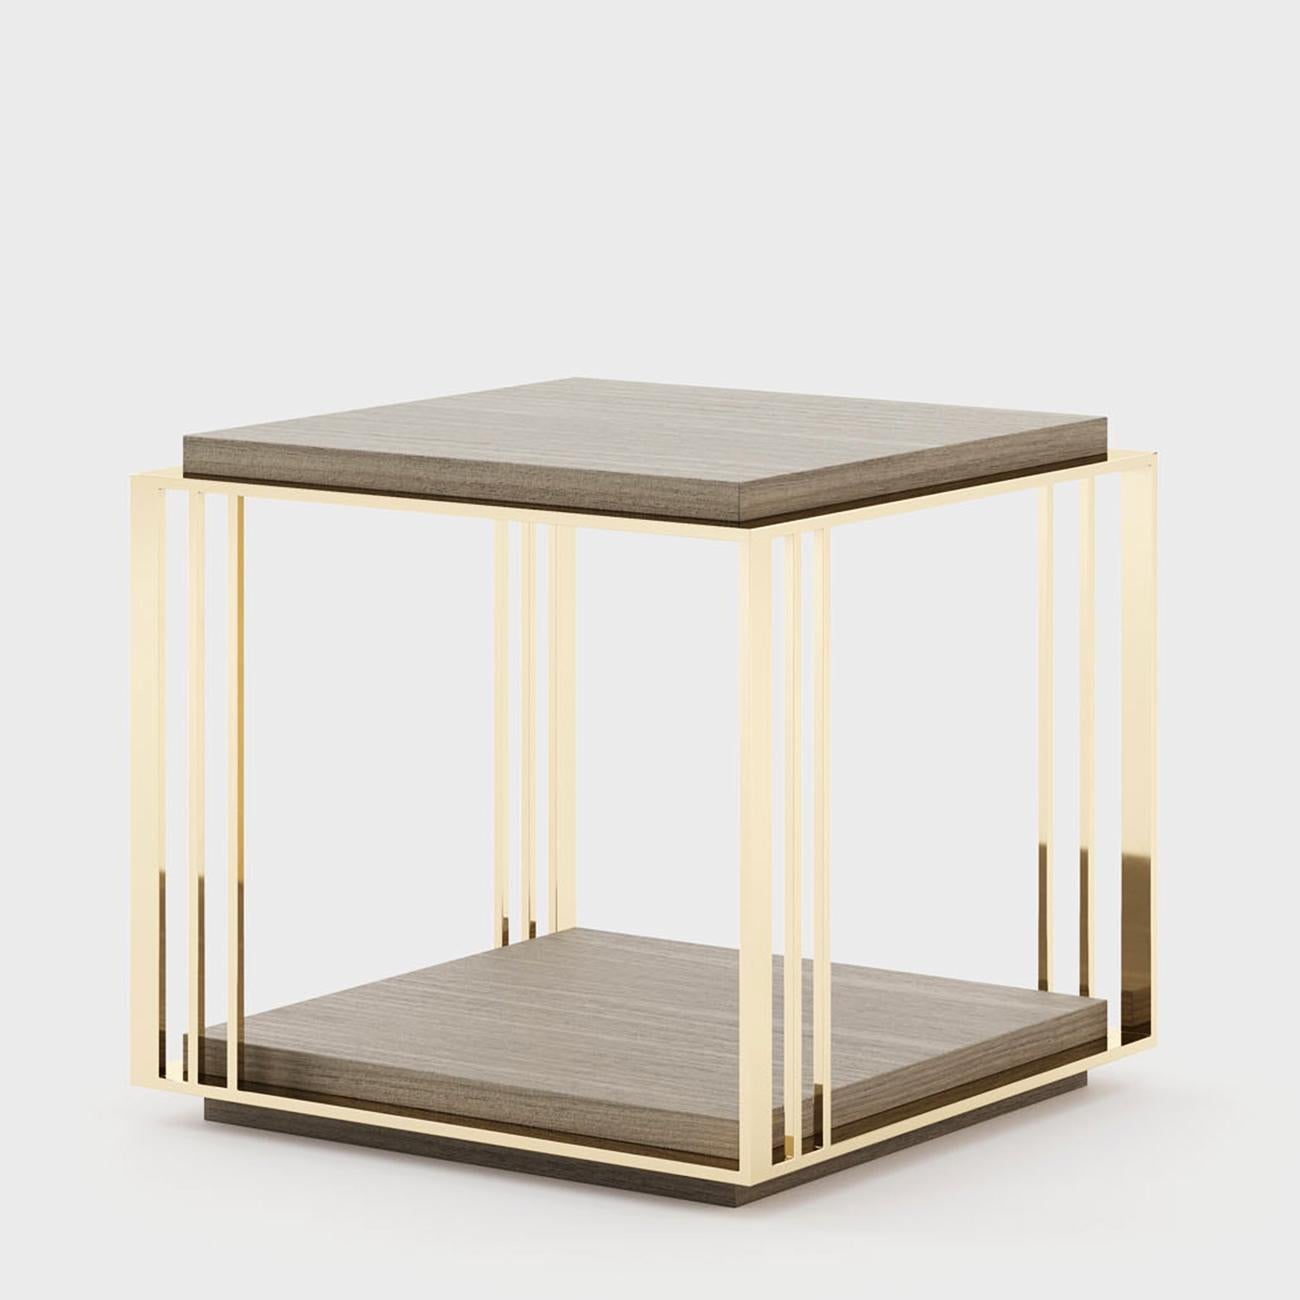 Side table Houston with polished stainless
steel structure in gold finish. With up and down
top in aged matte oak finish. 
Also available in other finishes on request.